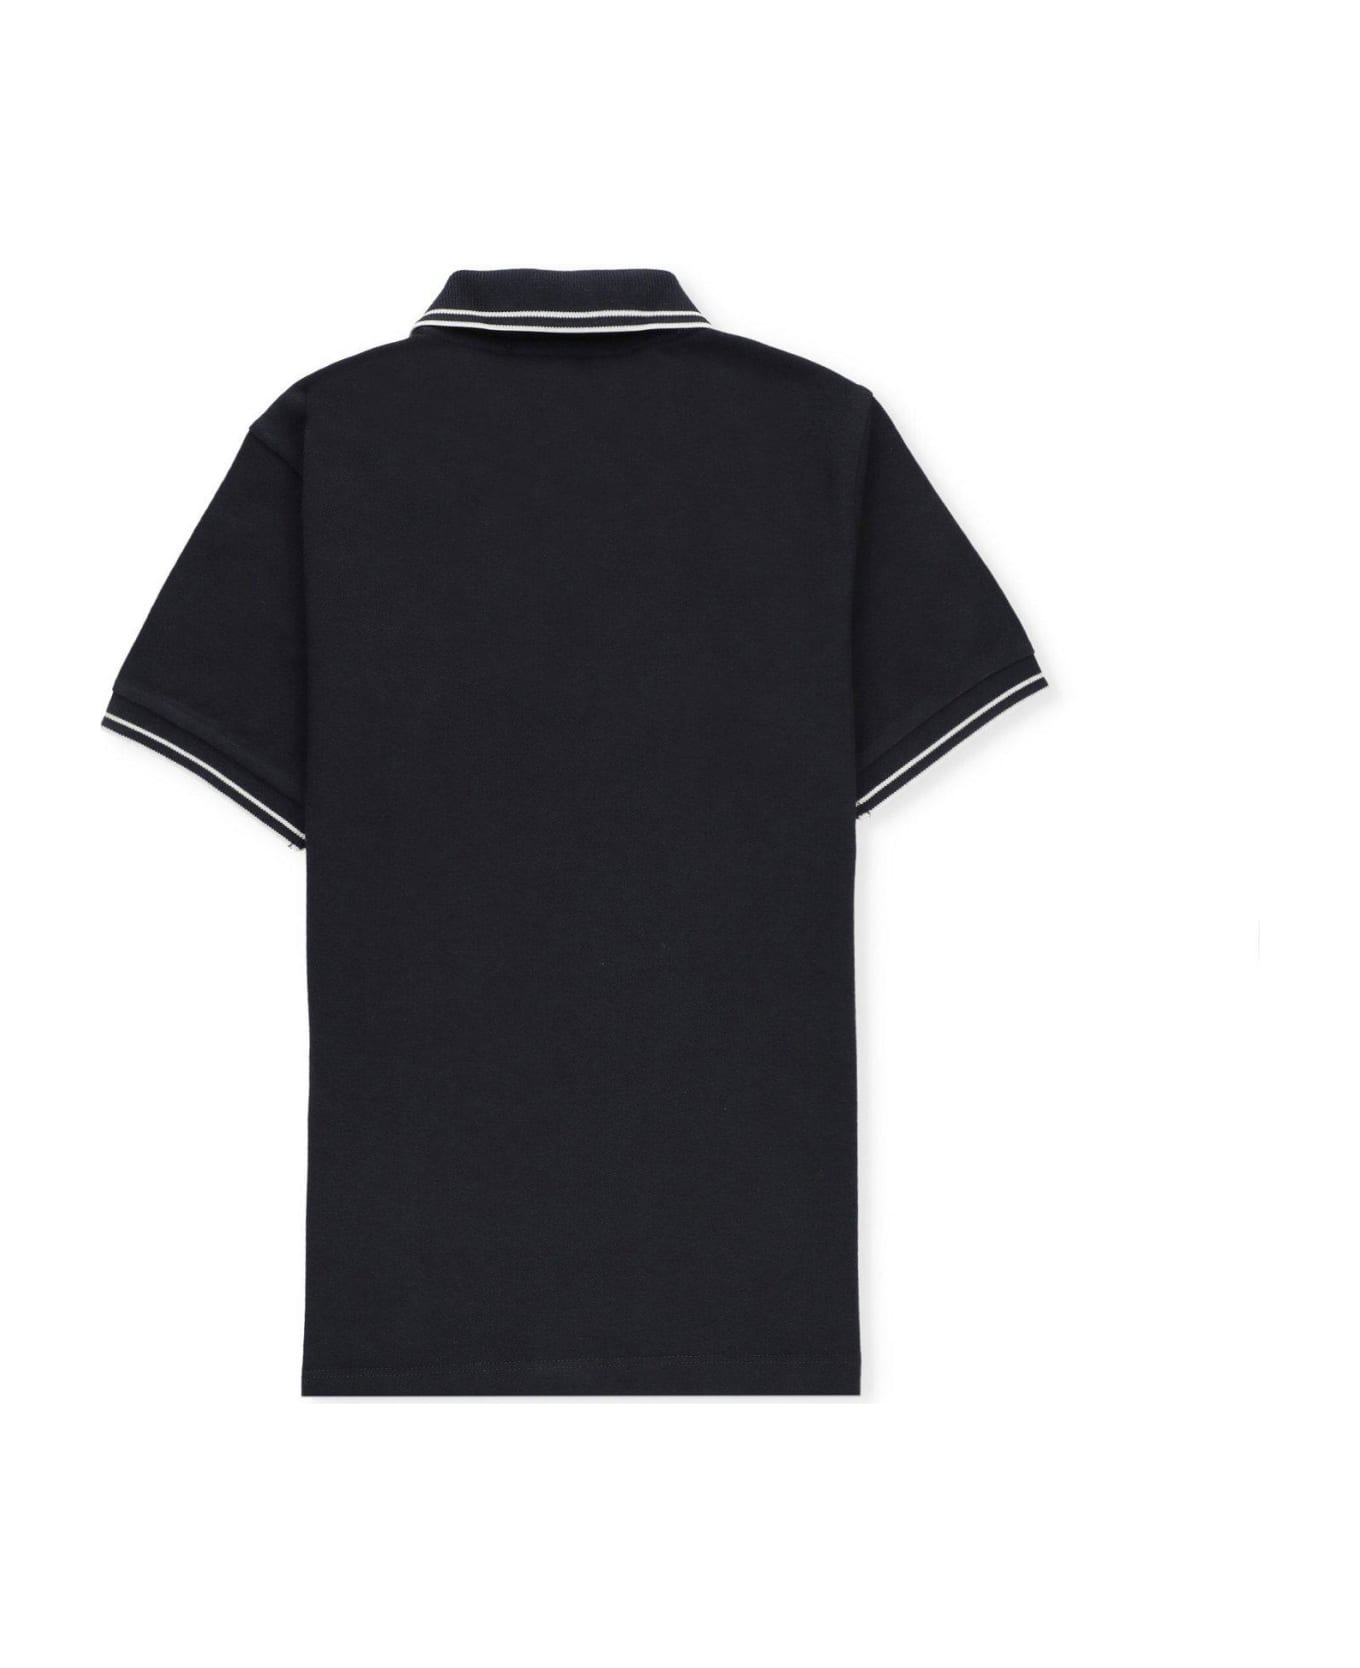 Stone Island Compass Patch Short-sleeved Polo Shirt - NAVY シャツ